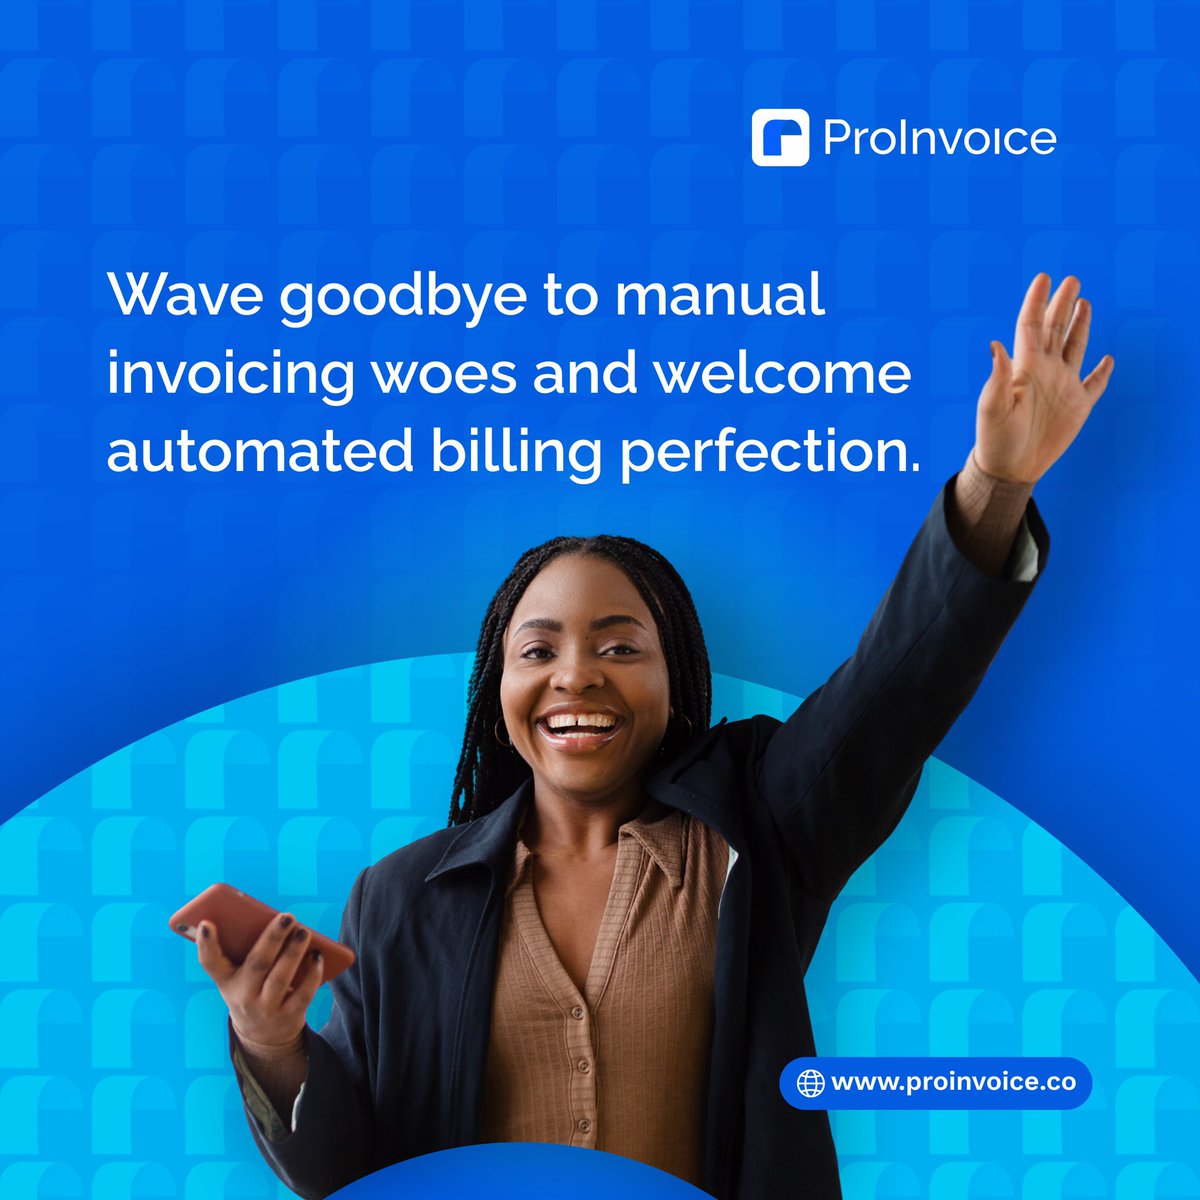 ProInvoice is the perfect tool for keeping your business finances in check.

With features like team management and expense tracking, ProInvoice helps you stay organized and look professional, all while saving you time.

#ProInvoice #invoicingsoftware #businessmanagement